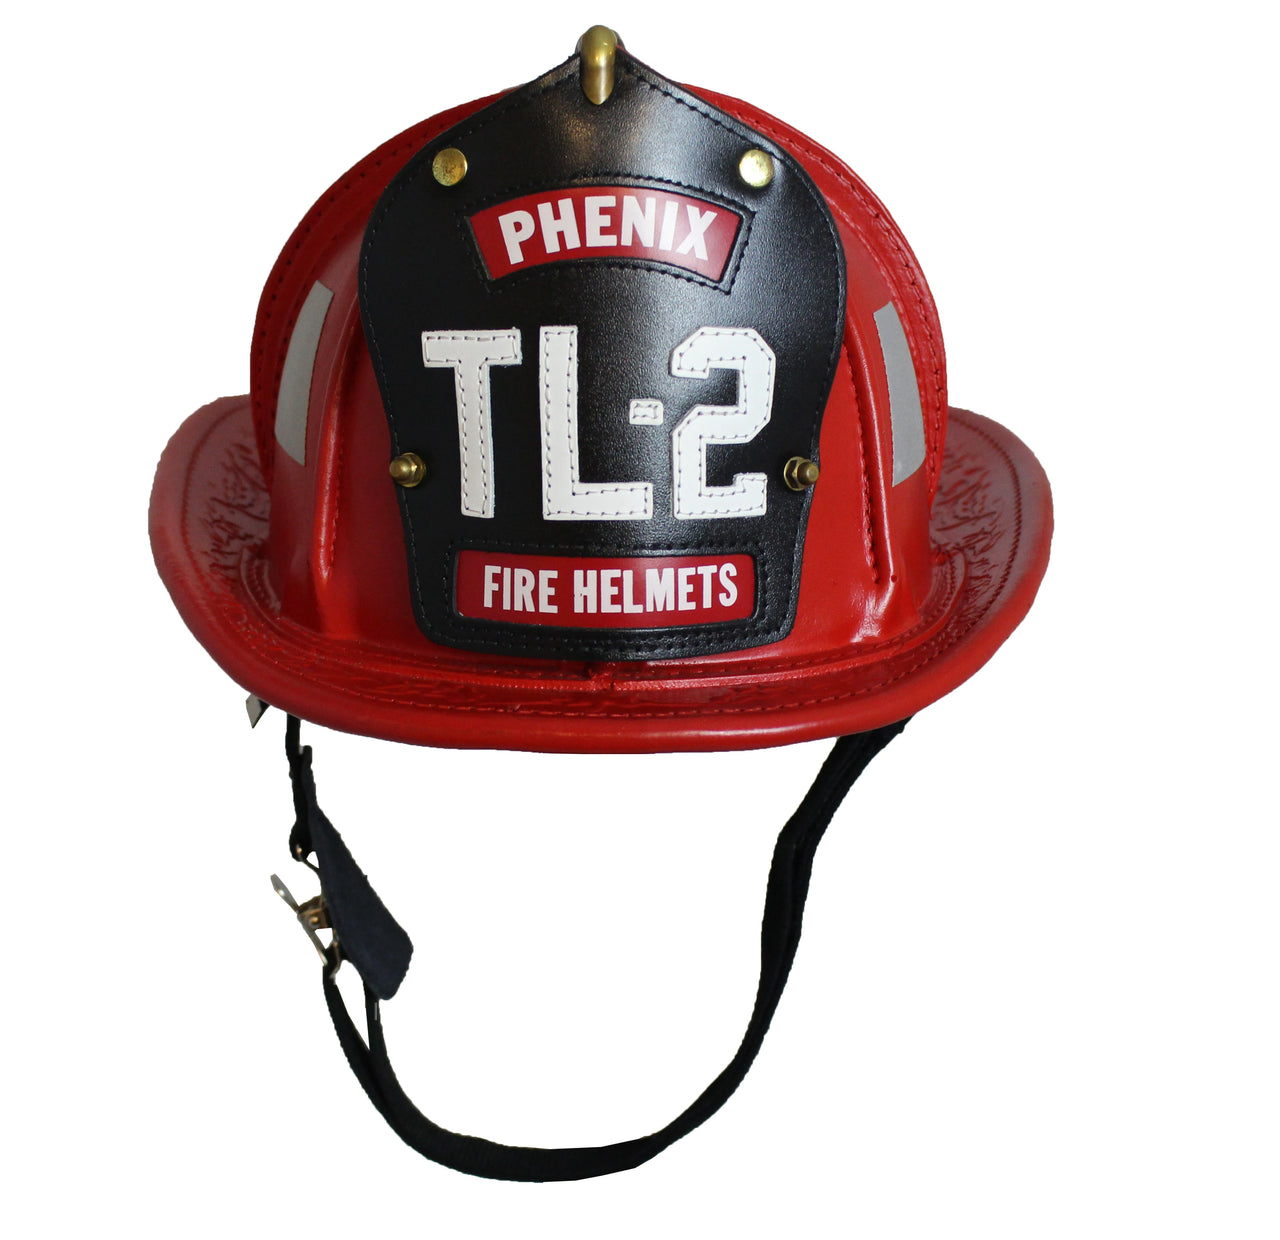 Phenix Technology TL2 Traditional Leather Fire Helmet | The Fire Center | Fuego Fire Center | FIREFIGHTER GEAR | The TL-2 Traditional Leather fire helmet is the lightest NFPA complaint authentic leather helmet on the market. Worn by firefighters worldwide, the TL-2 combines tradition and modern safety in a handcrafted masterpiece.  Compliant to current OSHA and NFPA 1971 standards.  Phenix helmets